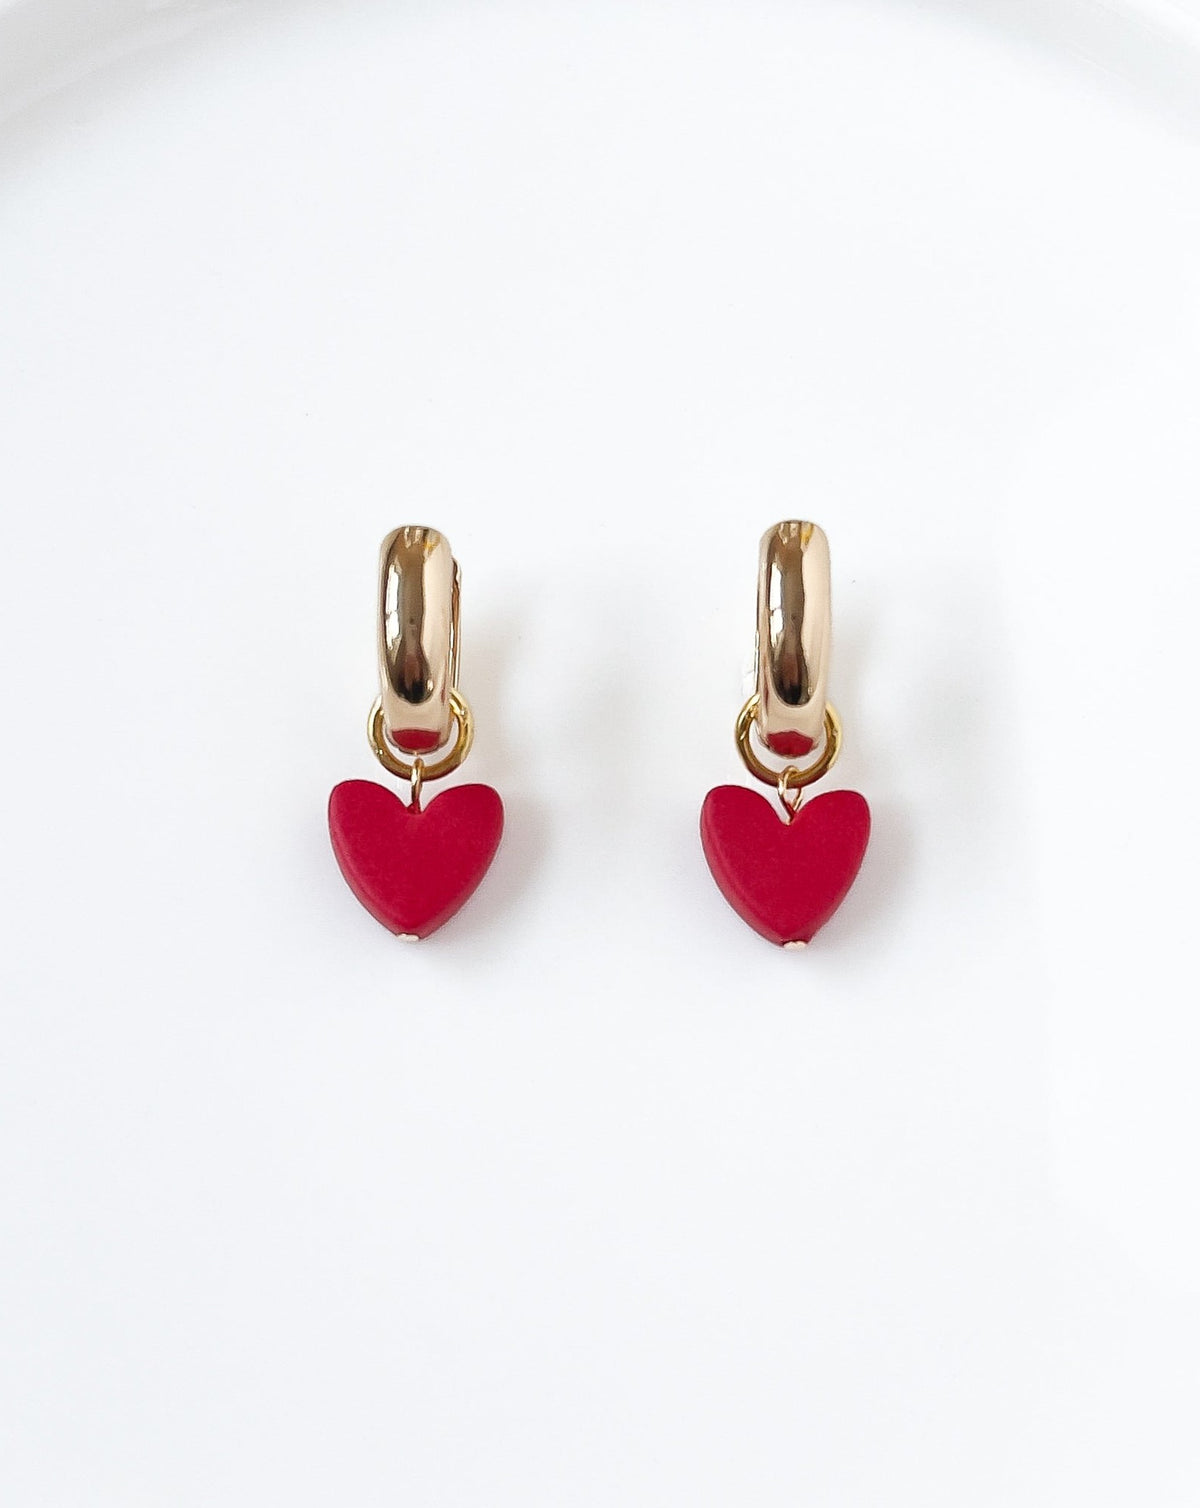 Showing the heart charm in color red with the Gold bold hoops.